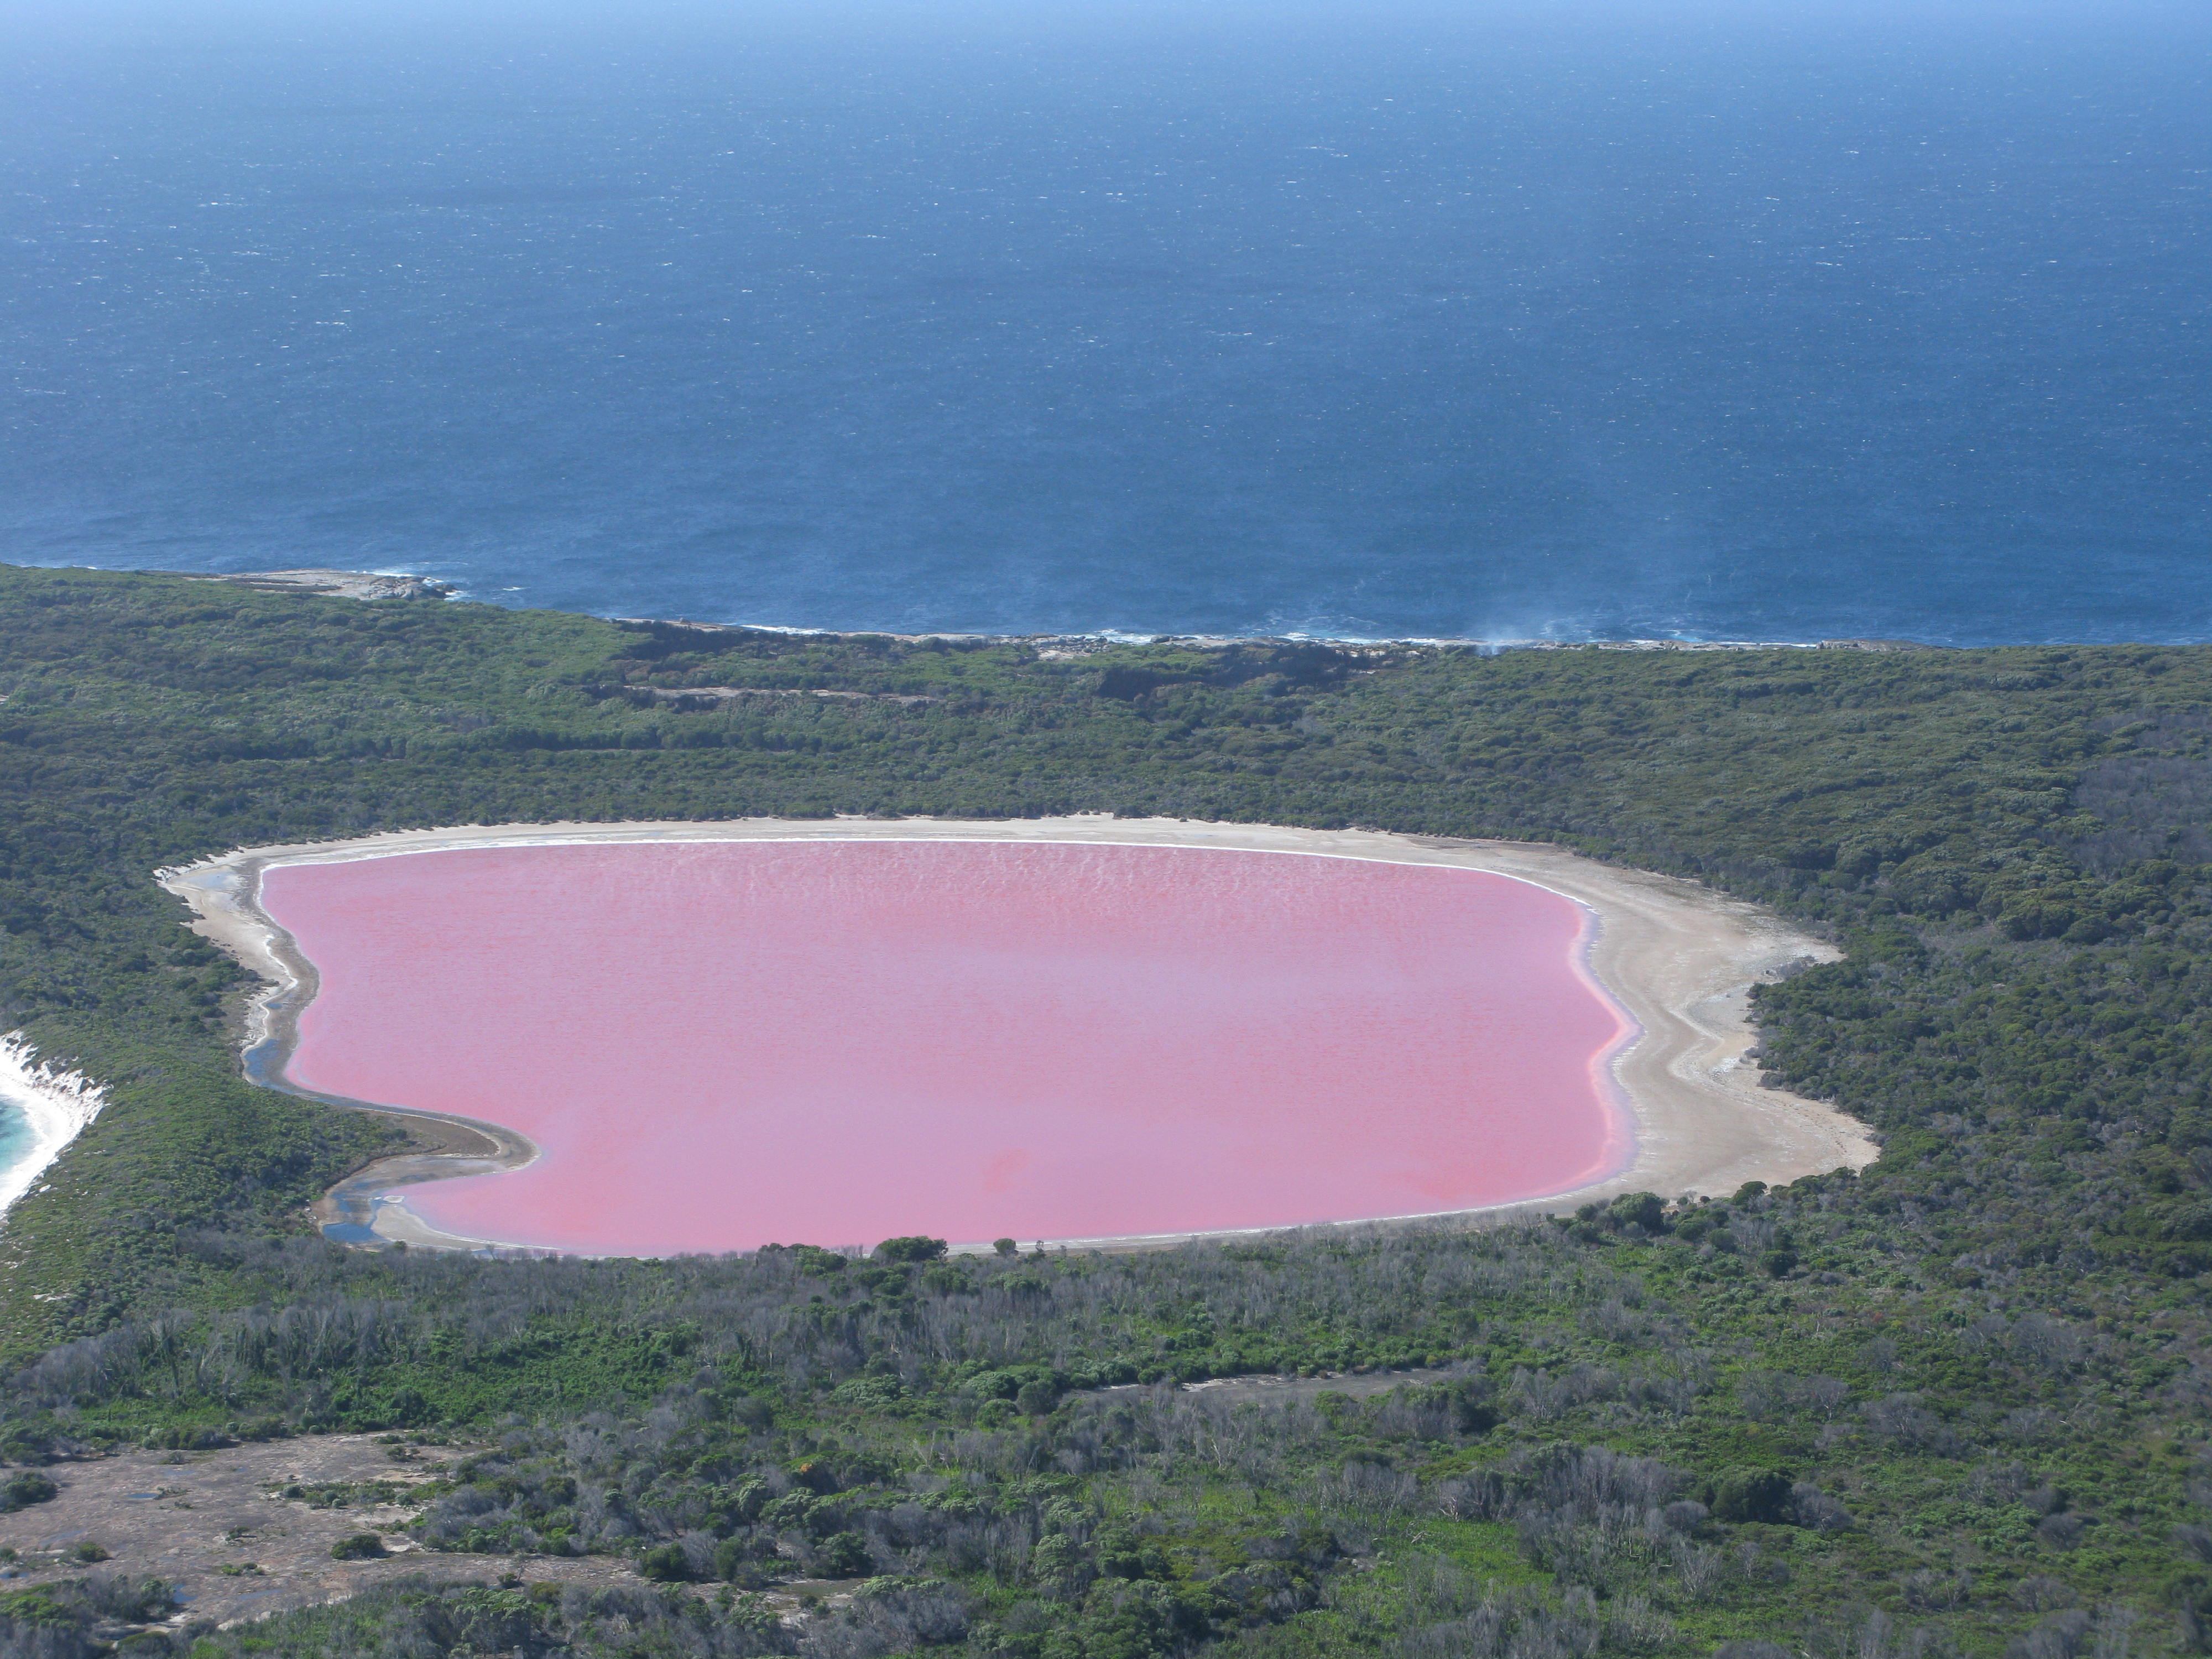 Lake Hillier- Most surreal places to visit